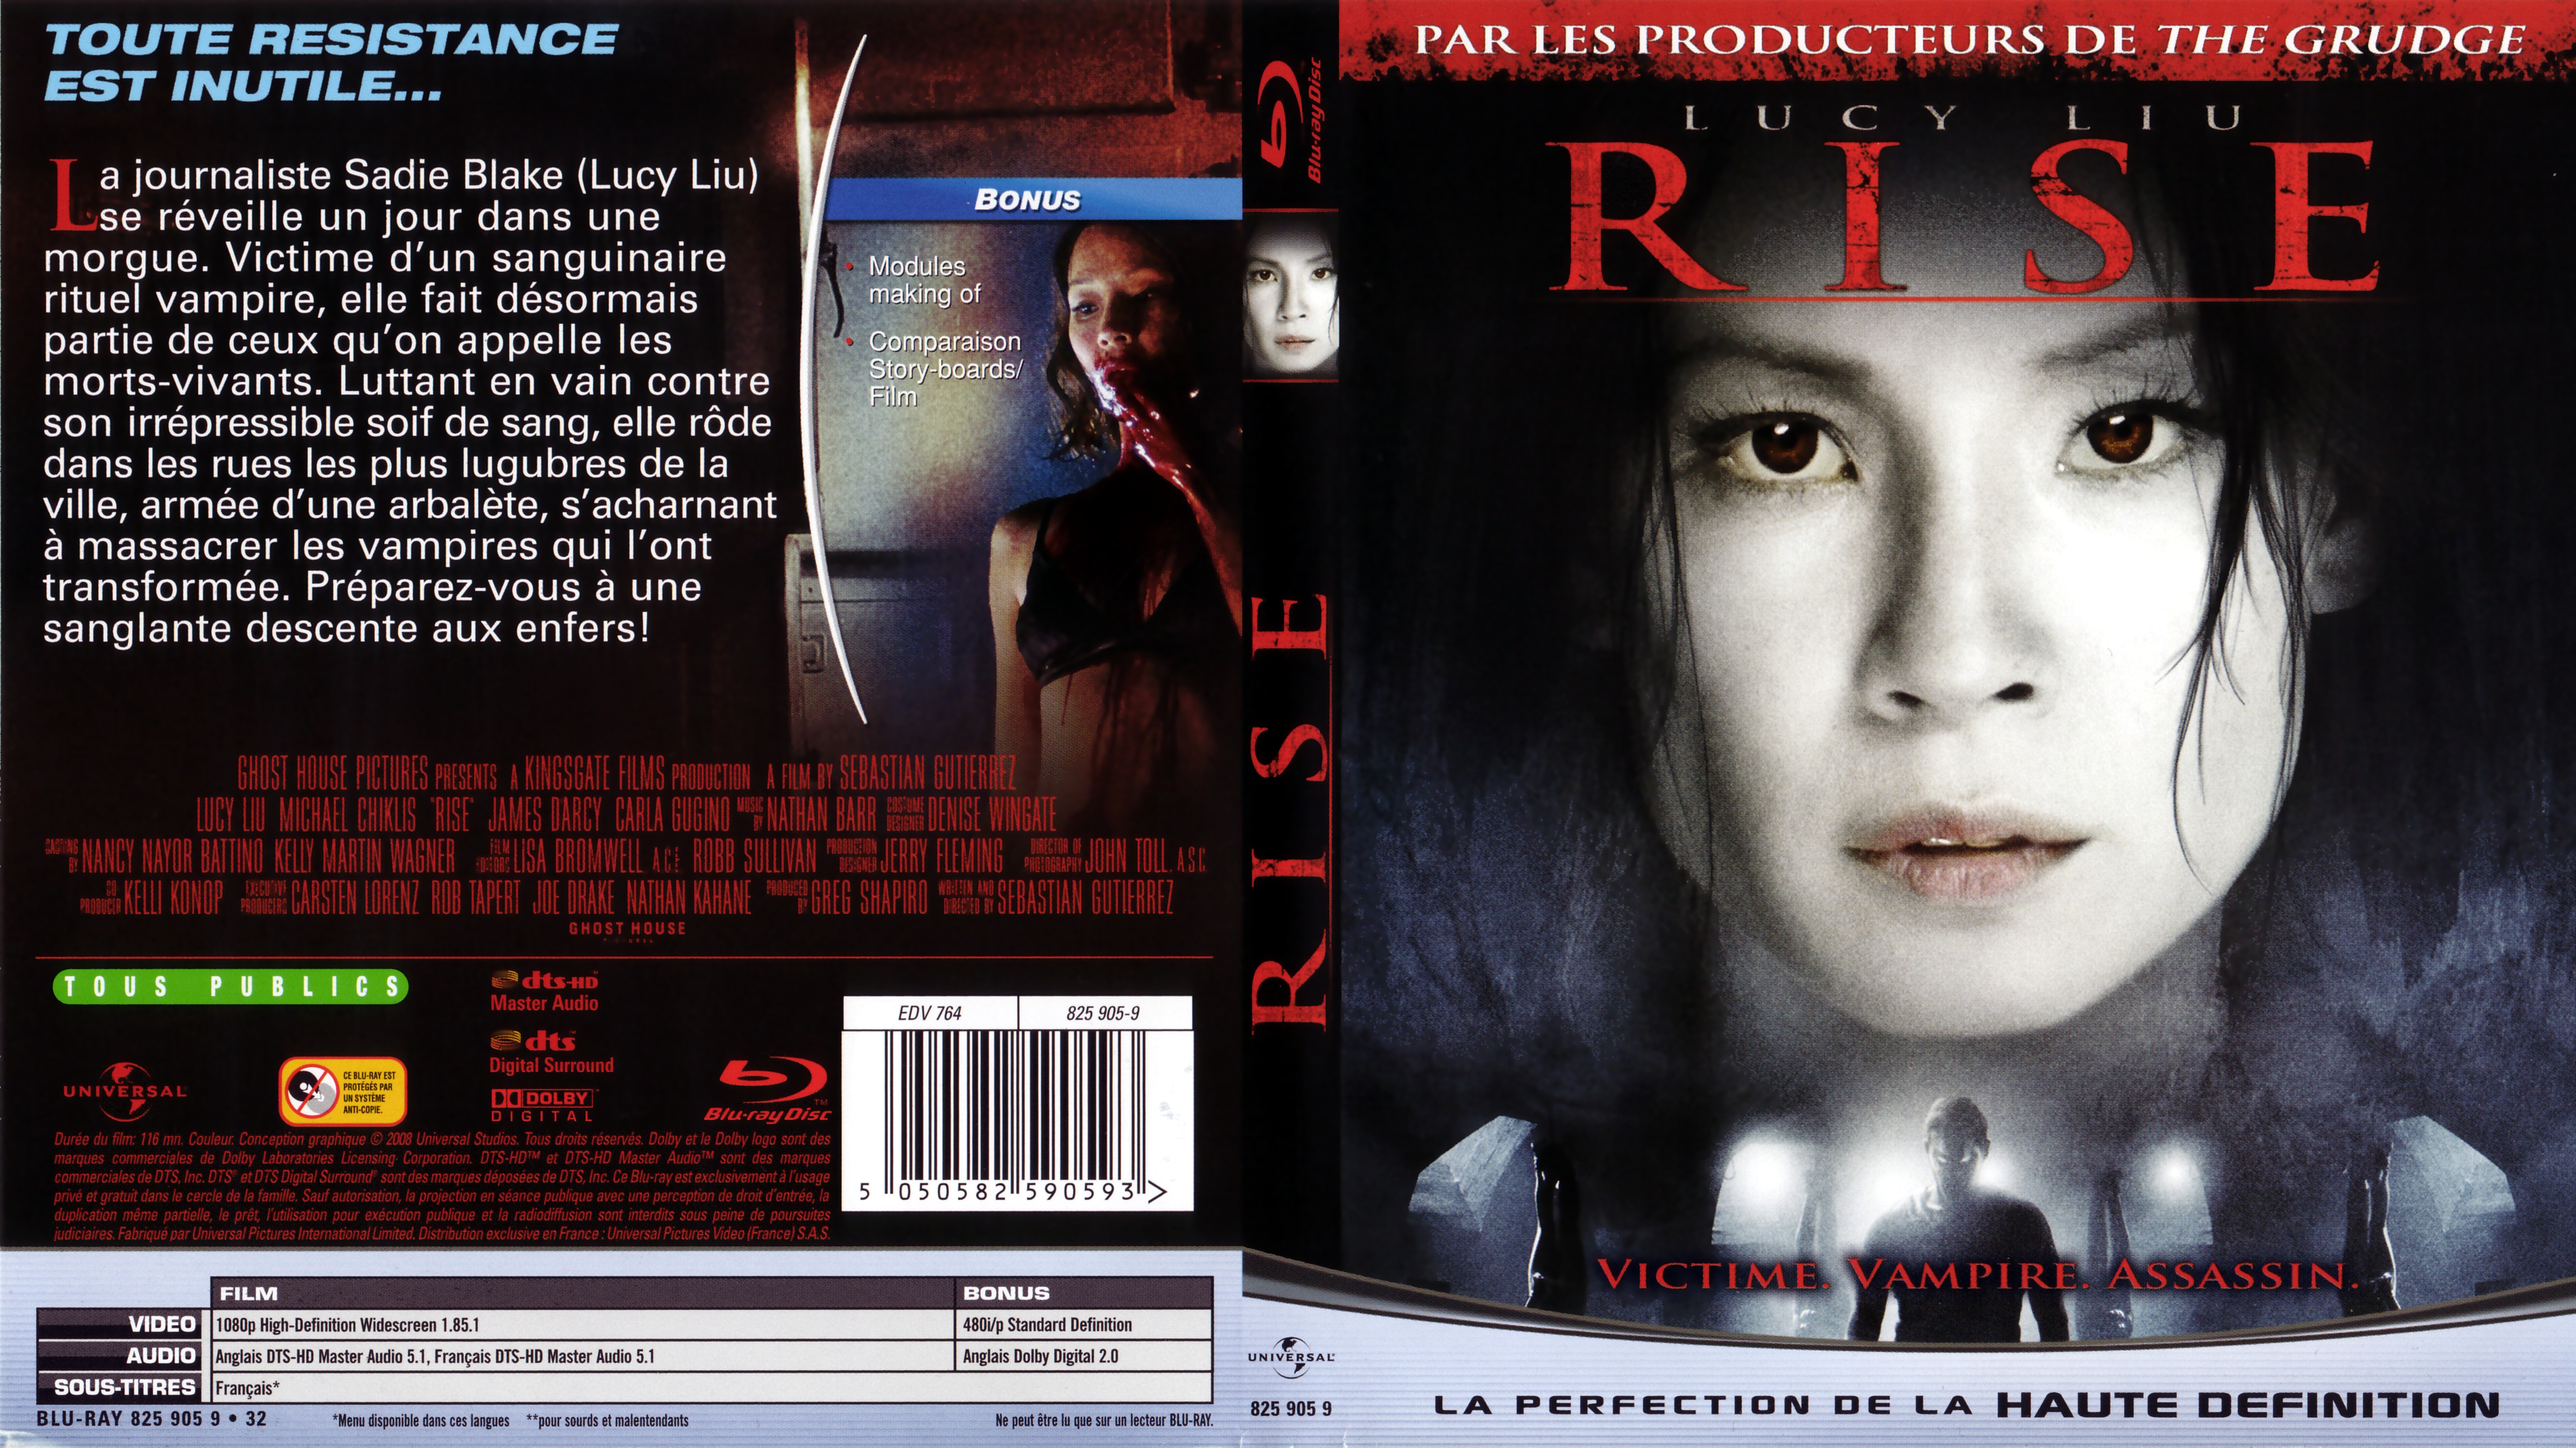 Jaquette DVD Rise (BLU-RAY)